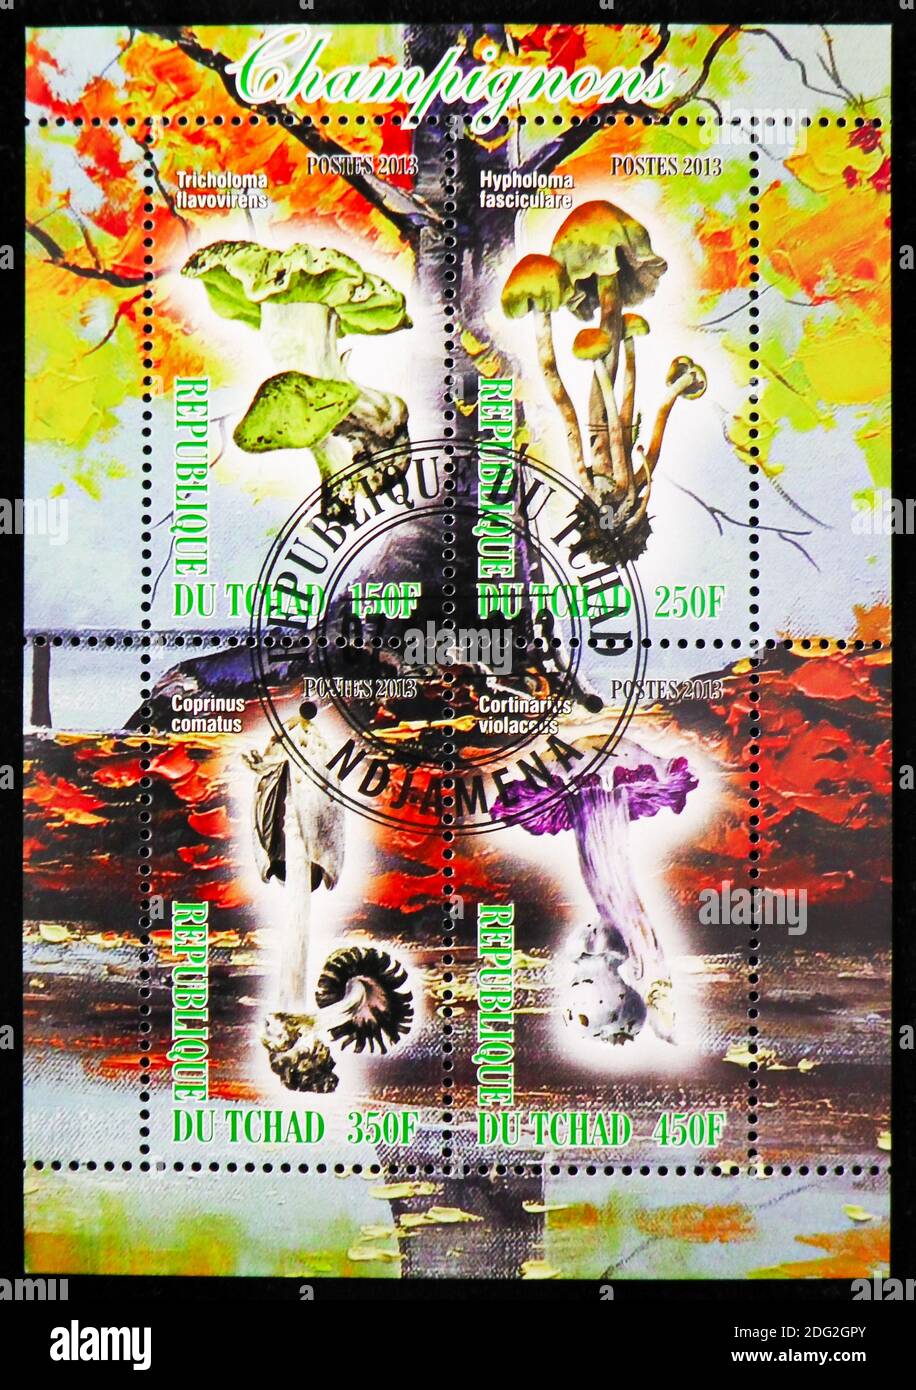 MOSCOW, RUSSIA - OCTOBER 21, 2018: A stamps printed in Chad shows block of Mushrooms serie, circa 2013 Stock Photo